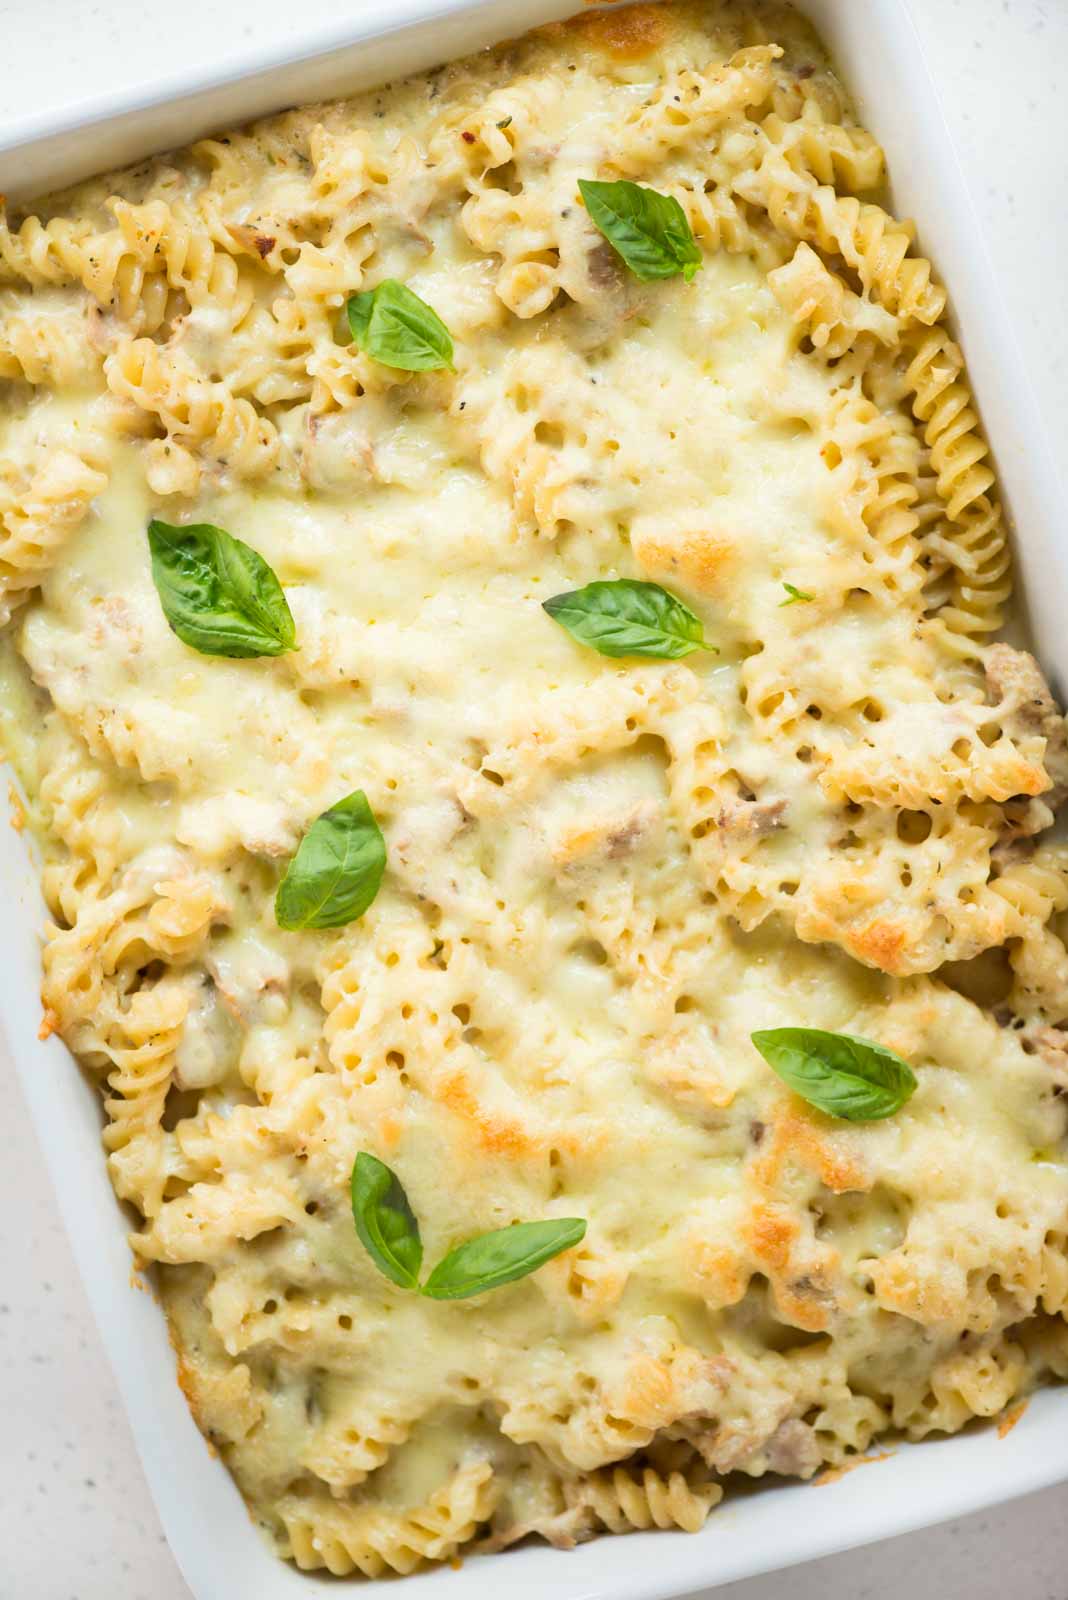 Creamy and indulgent Tuna pasta is a comfort meal that the entire family loves. Canned tuna and pasta tossed in a creamy cheesy sauce and baked until bubbly. 
